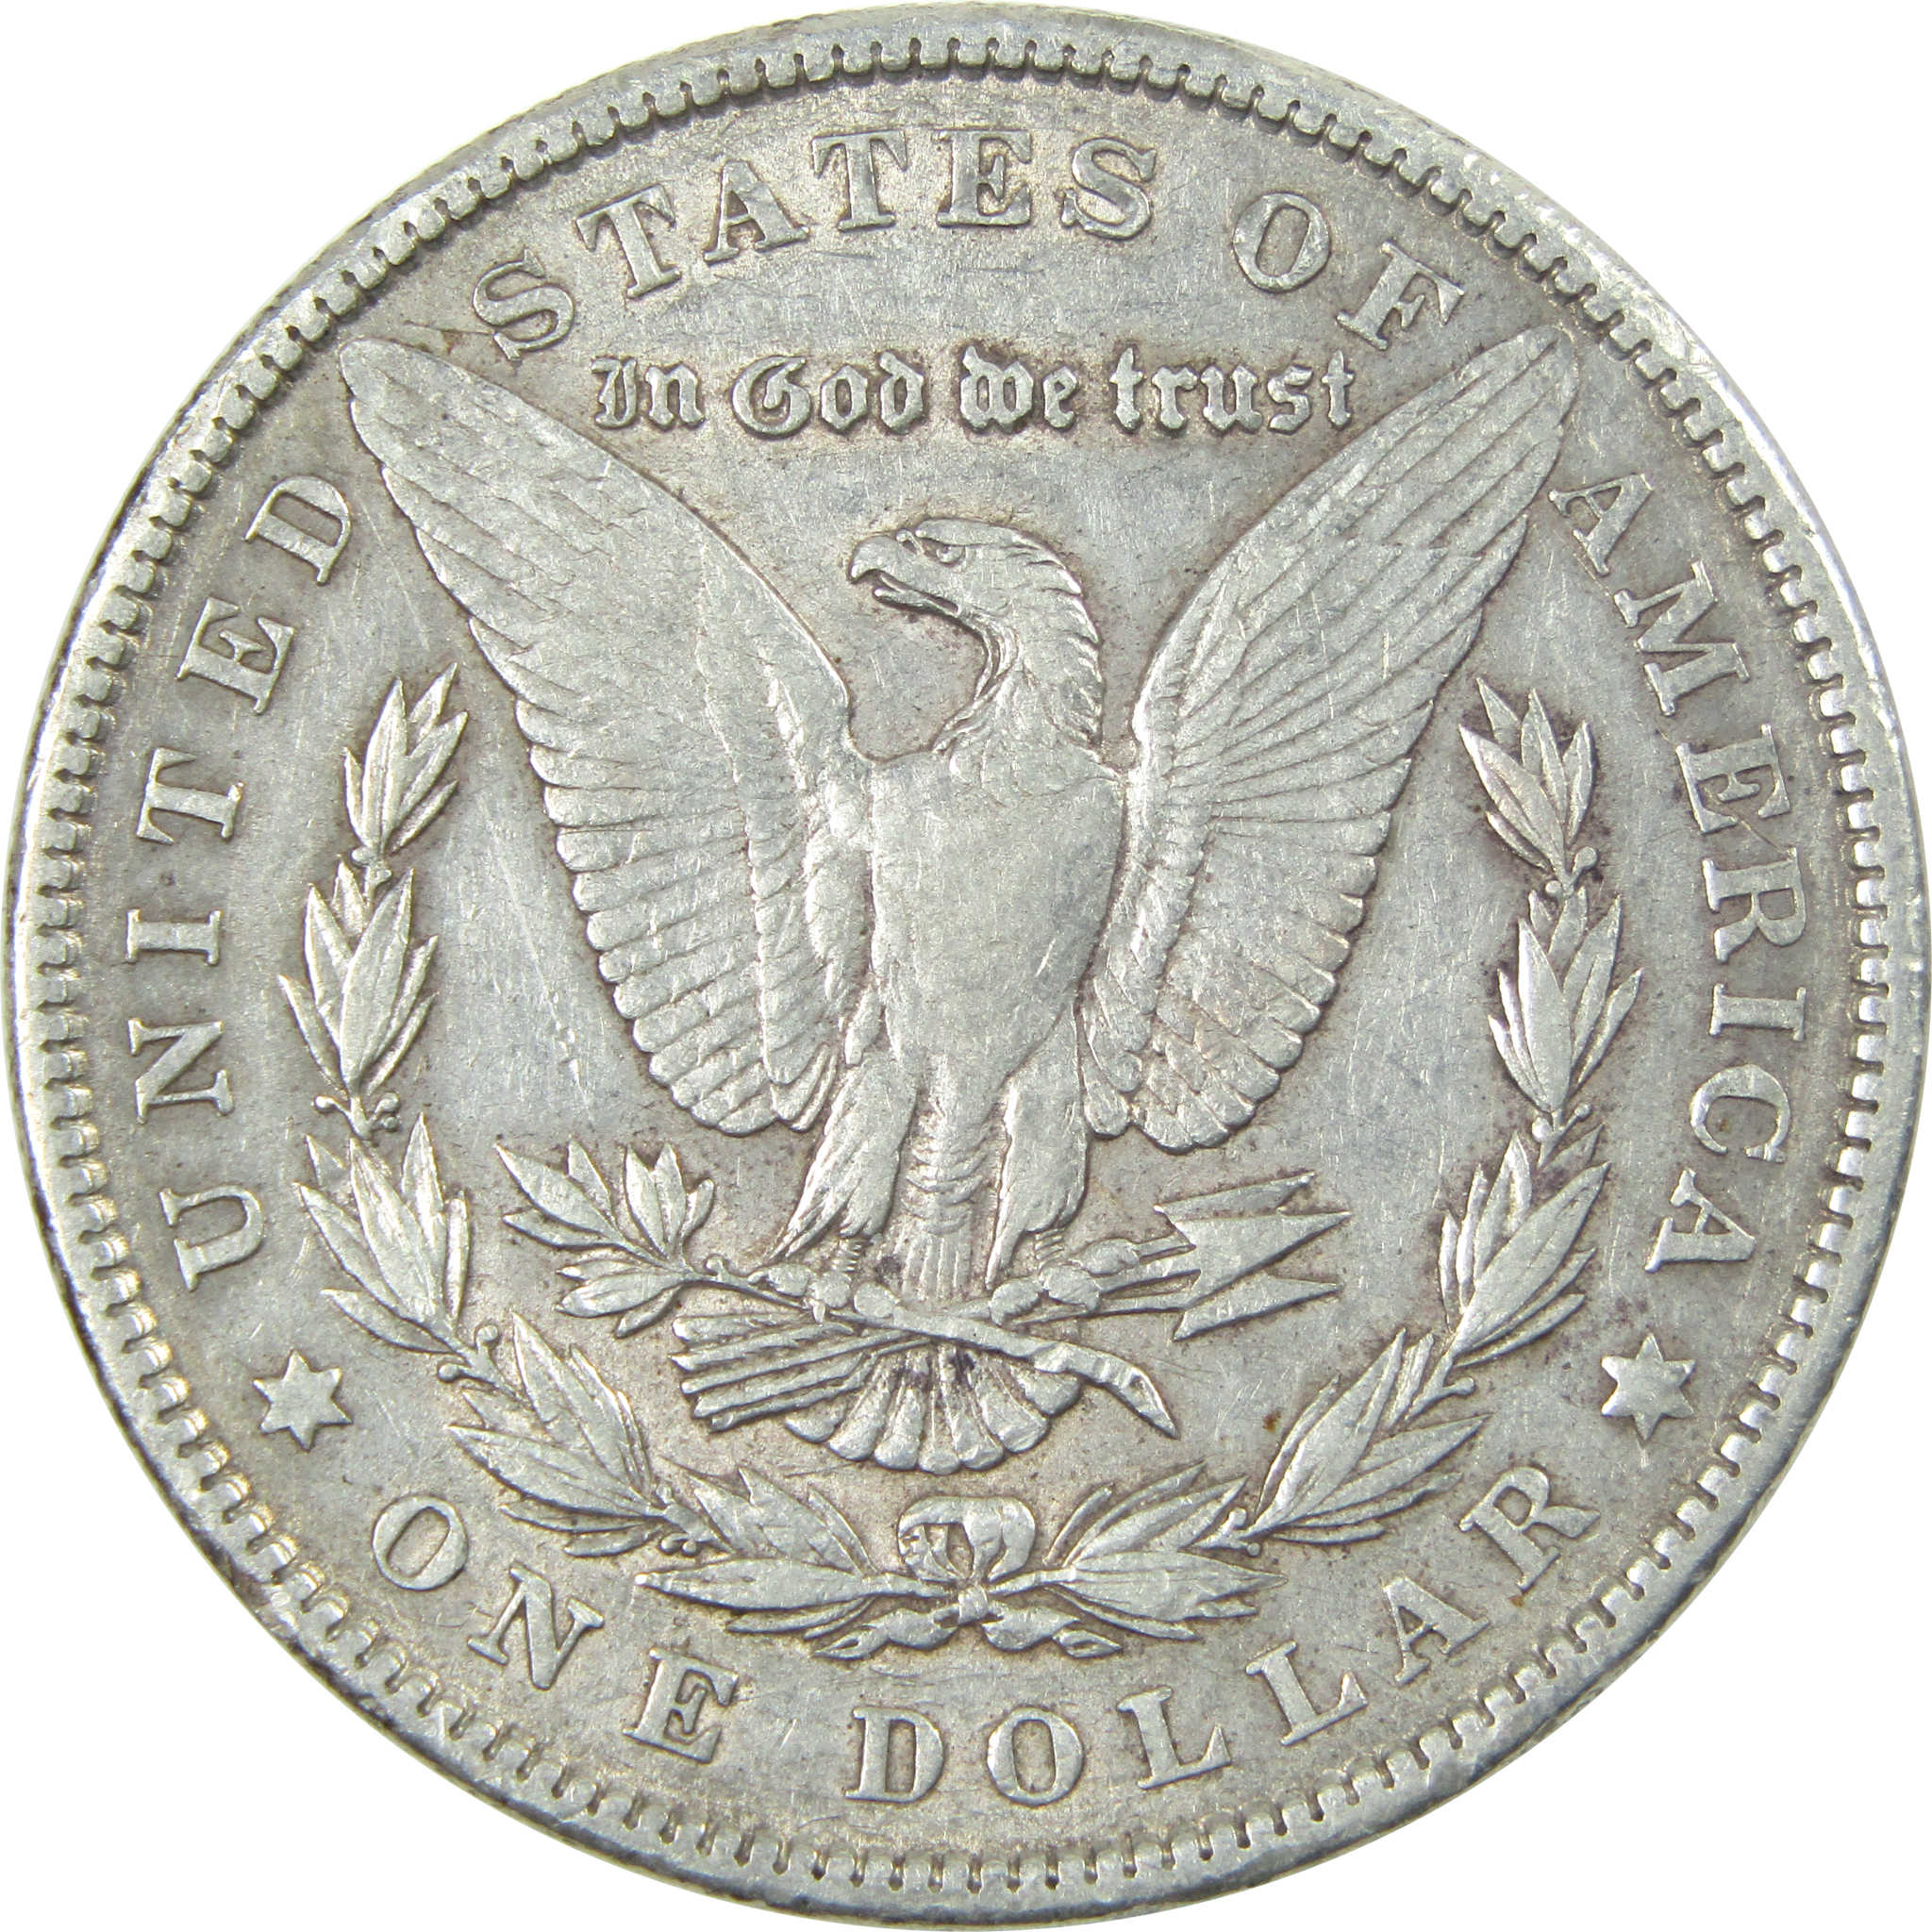 1904 Morgan Dollar XF EF Extremely Fine Silver $1 Coin SKU:I13941 - Morgan coin - Morgan silver dollar - Morgan silver dollar for sale - Profile Coins &amp; Collectibles